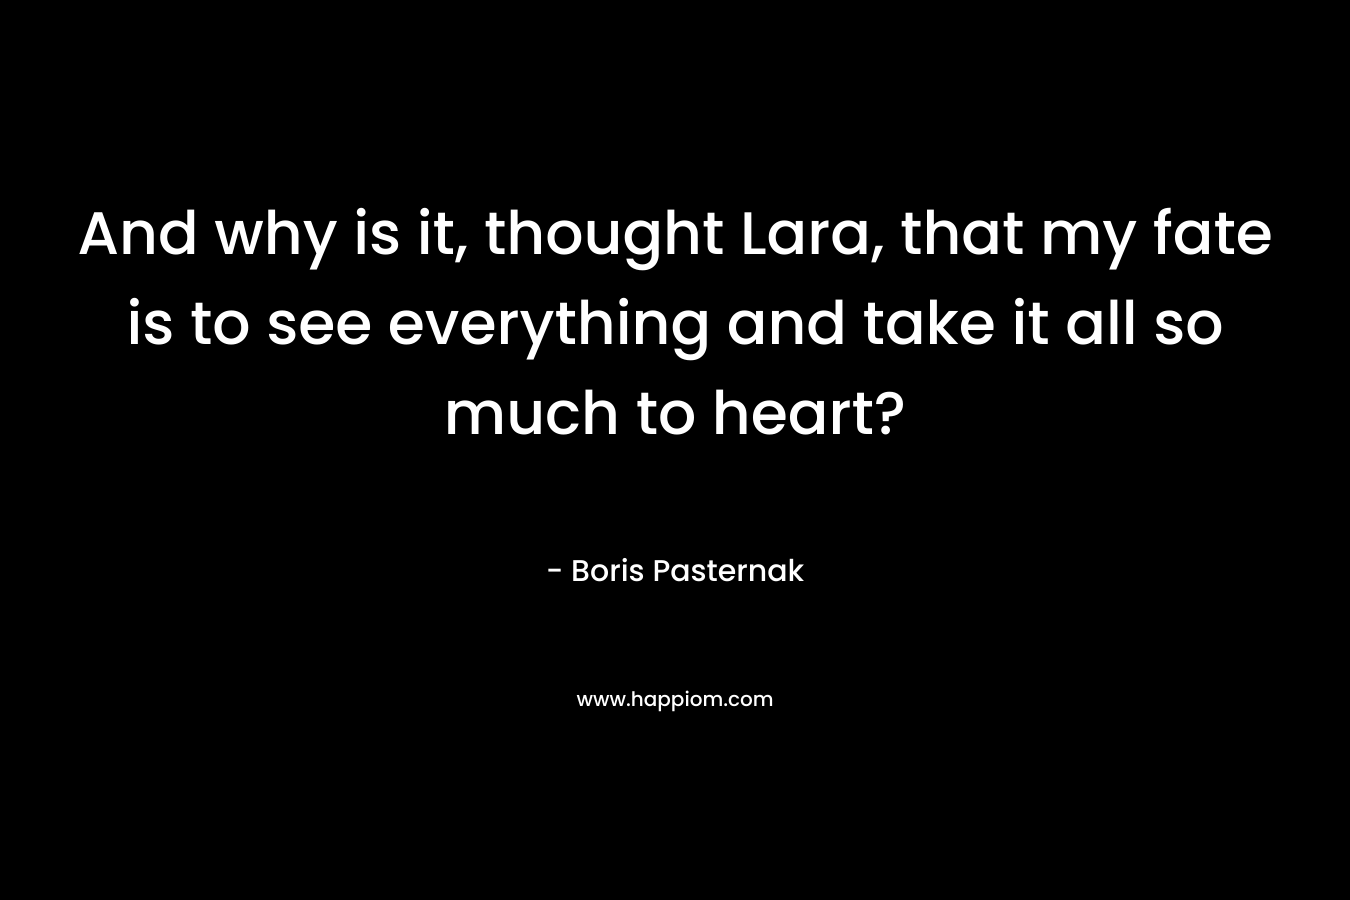 And why is it, thought Lara, that my fate is to see everything and take it all so much to heart? – Boris Pasternak